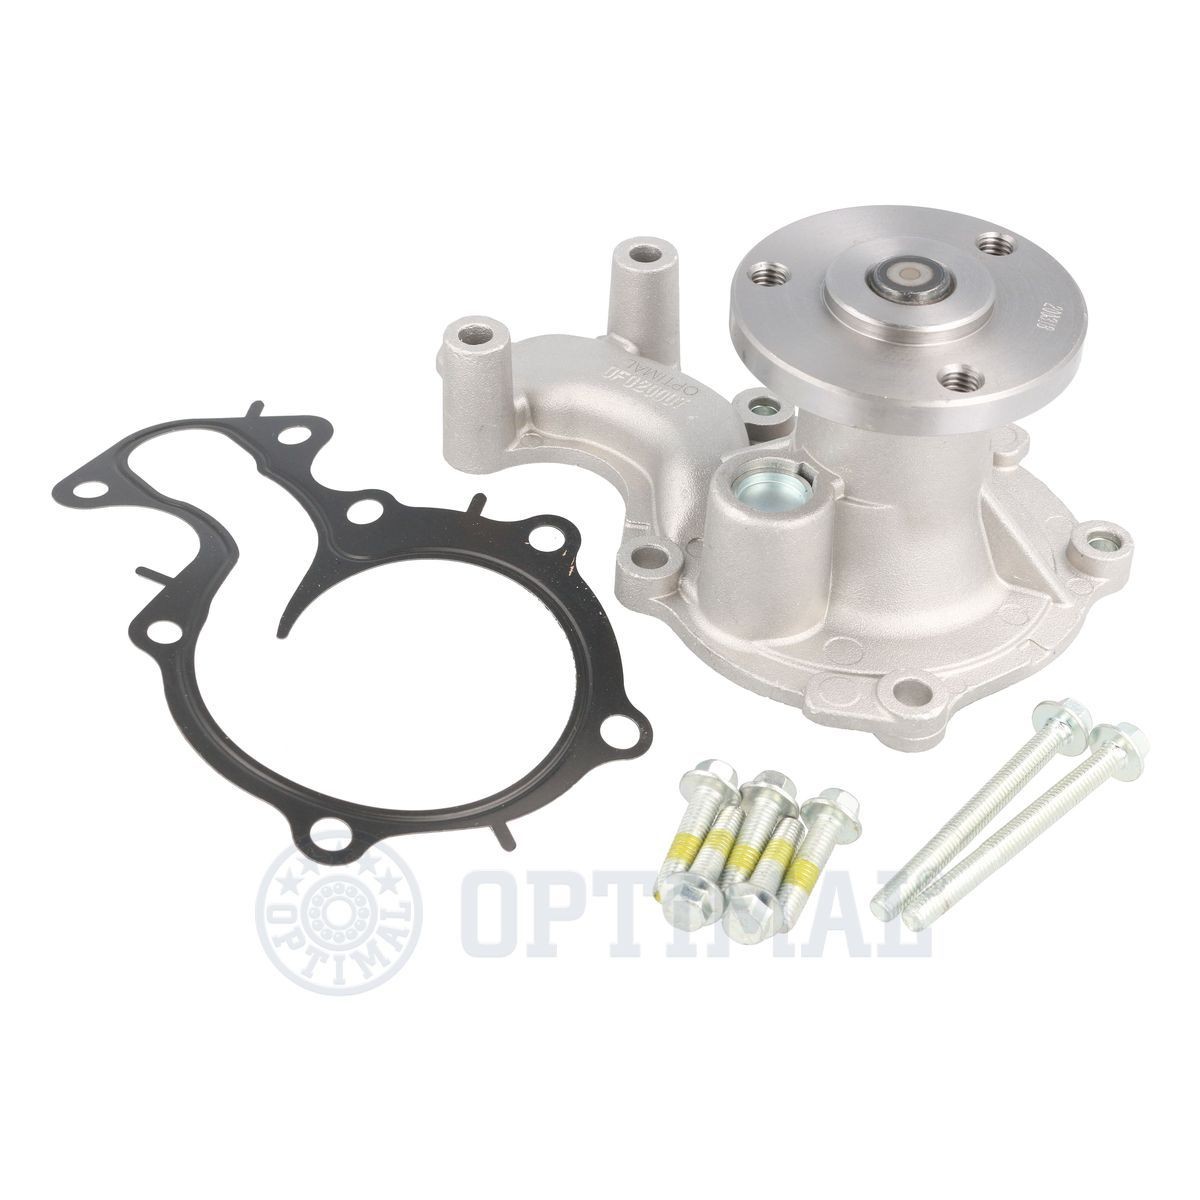 OPTIMAL AQ-2368 Water pump with accessories, with seal, Mechanical